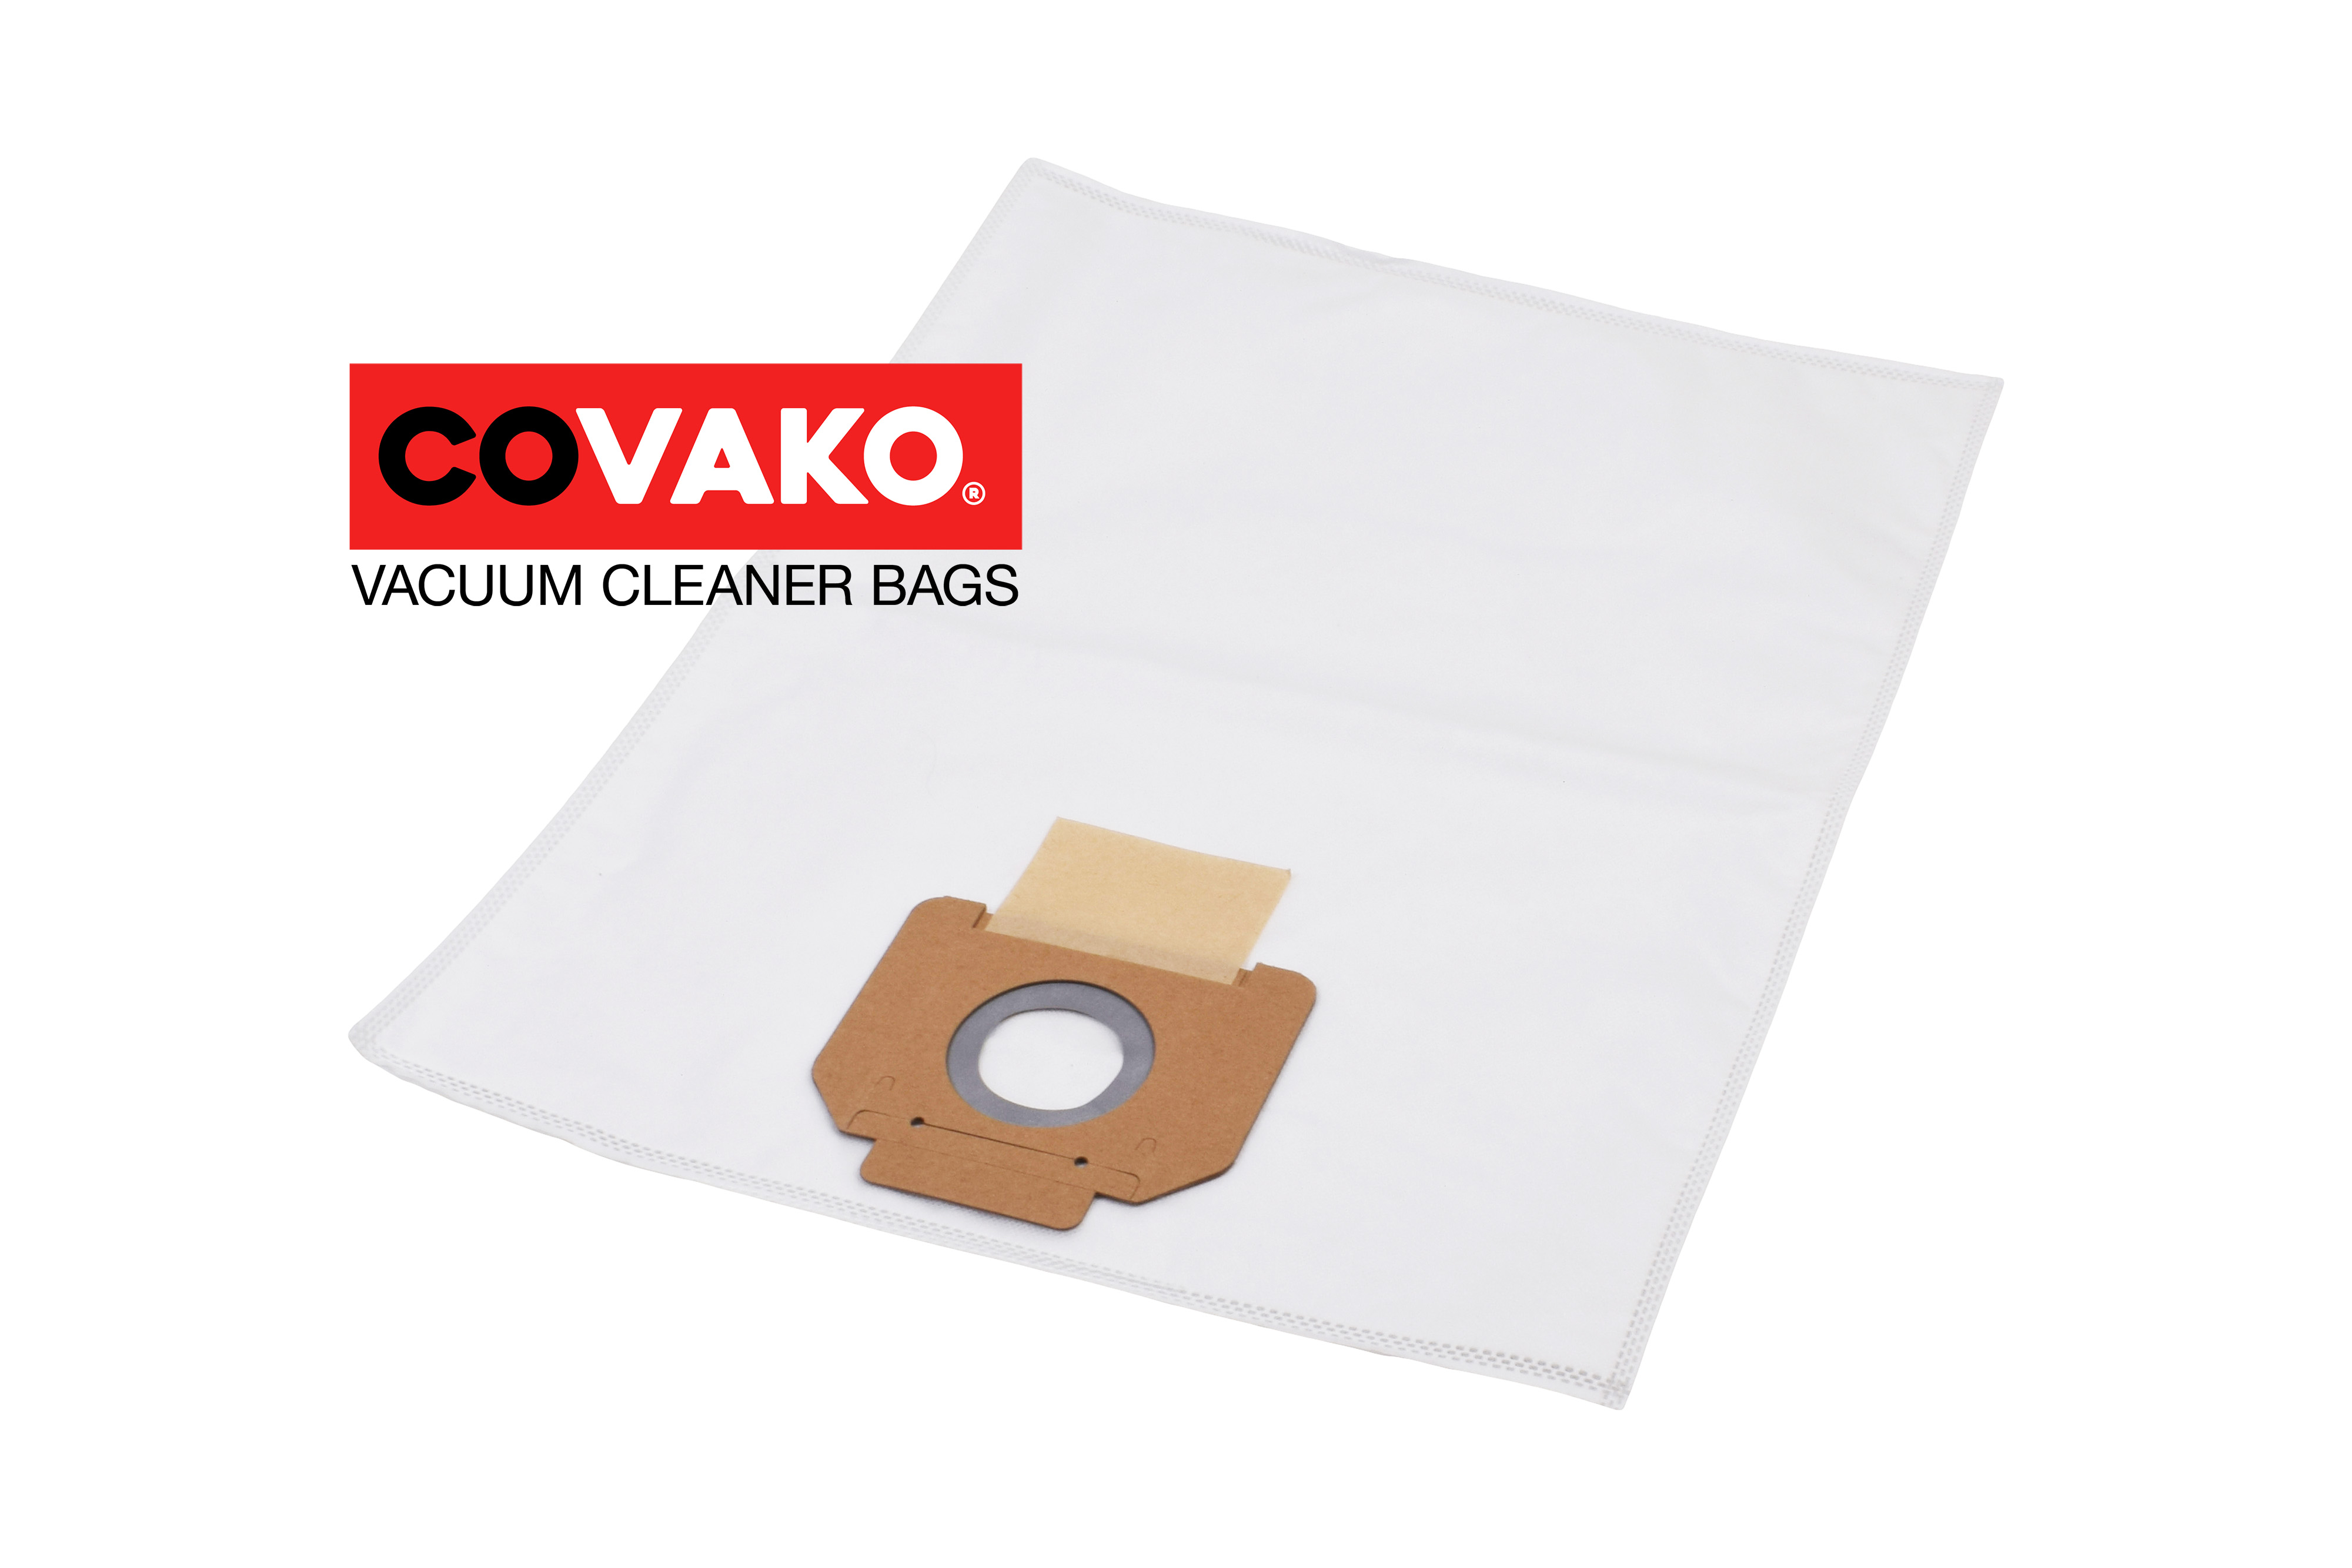 Bosch GAS 35 L AFC / Synthesis - Bosch vacuum cleaner bags